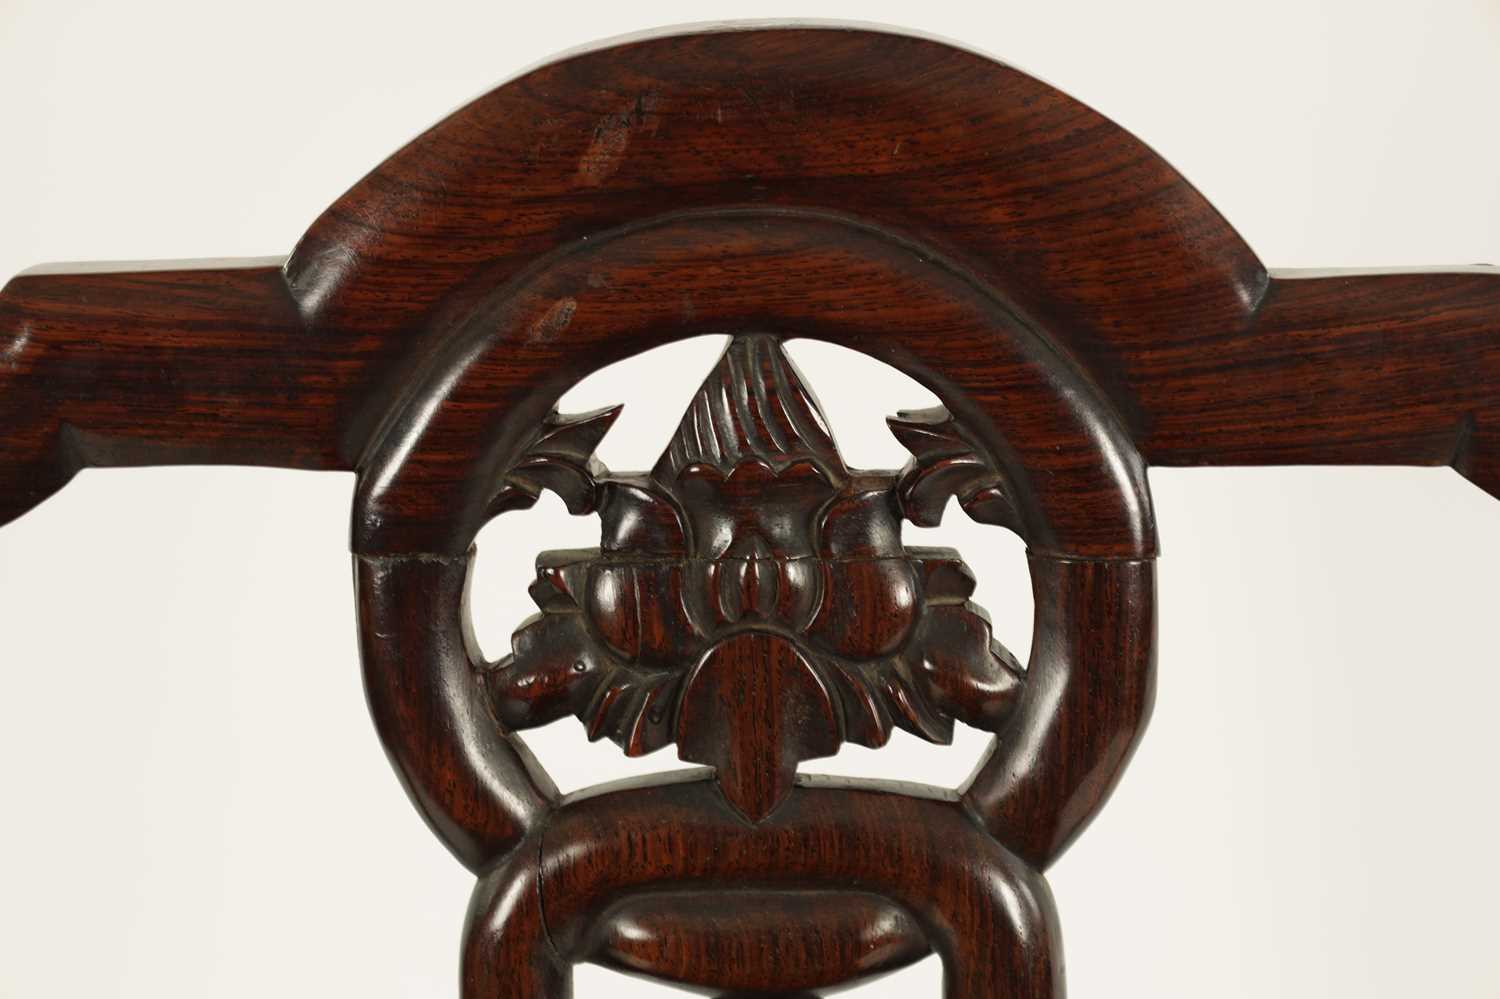 A GOOD PAIR OF 19TH CENTURY CHINESE HARDWOOD SIDE CHAIRS - Image 2 of 11